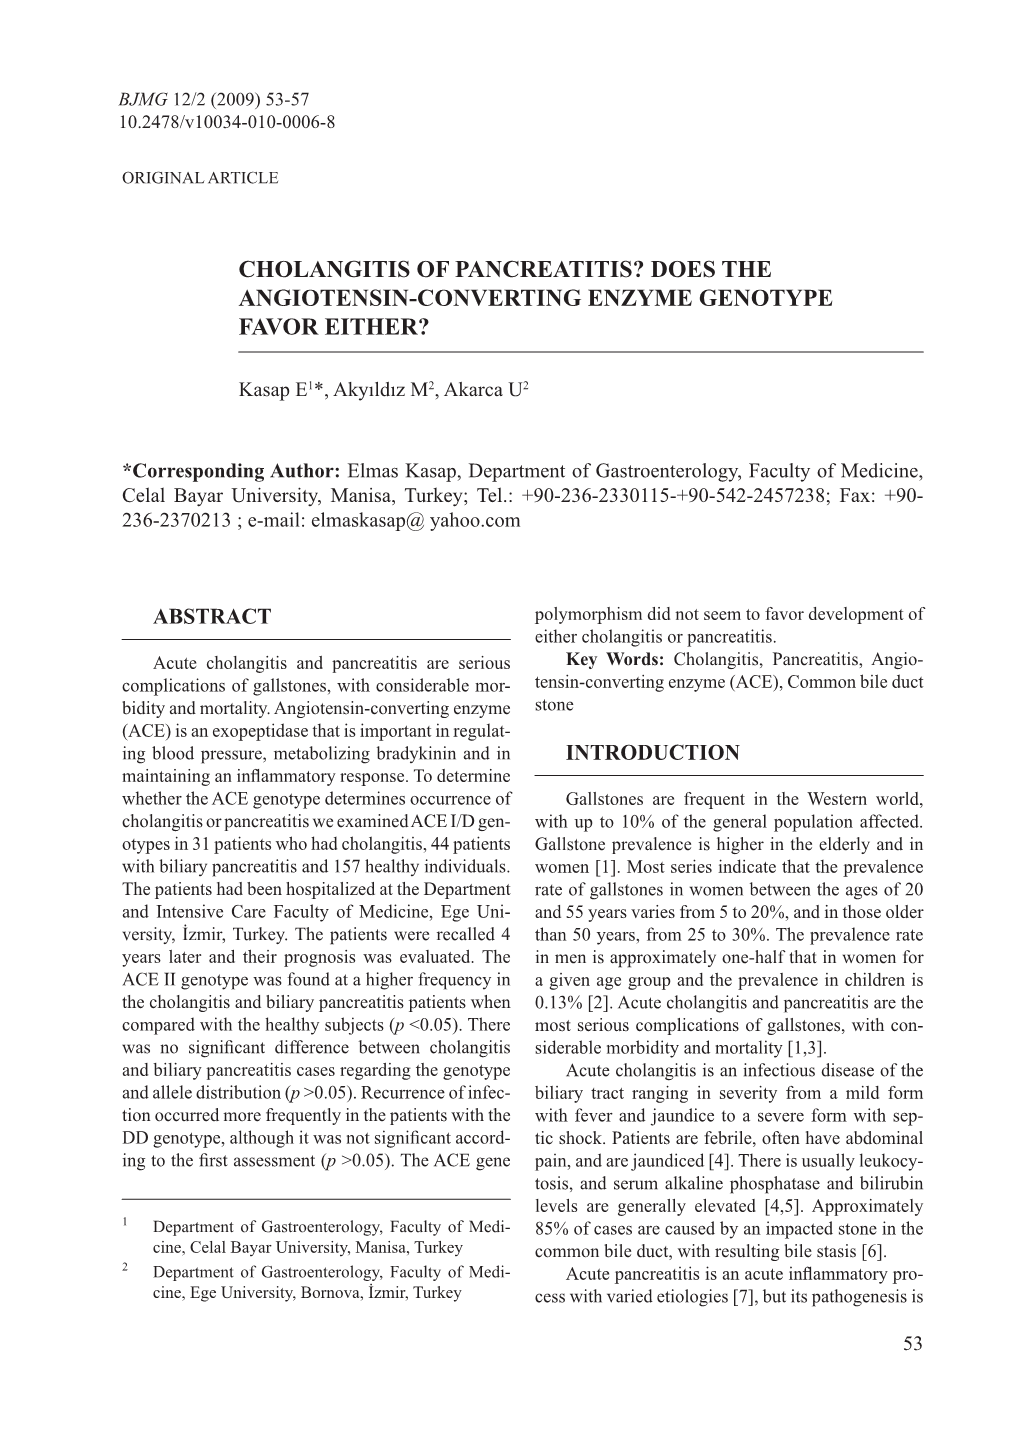 Cholangitis of Pancreatitis? Does the Angiotensin-Converting Enzyme Genotype Favor Either?